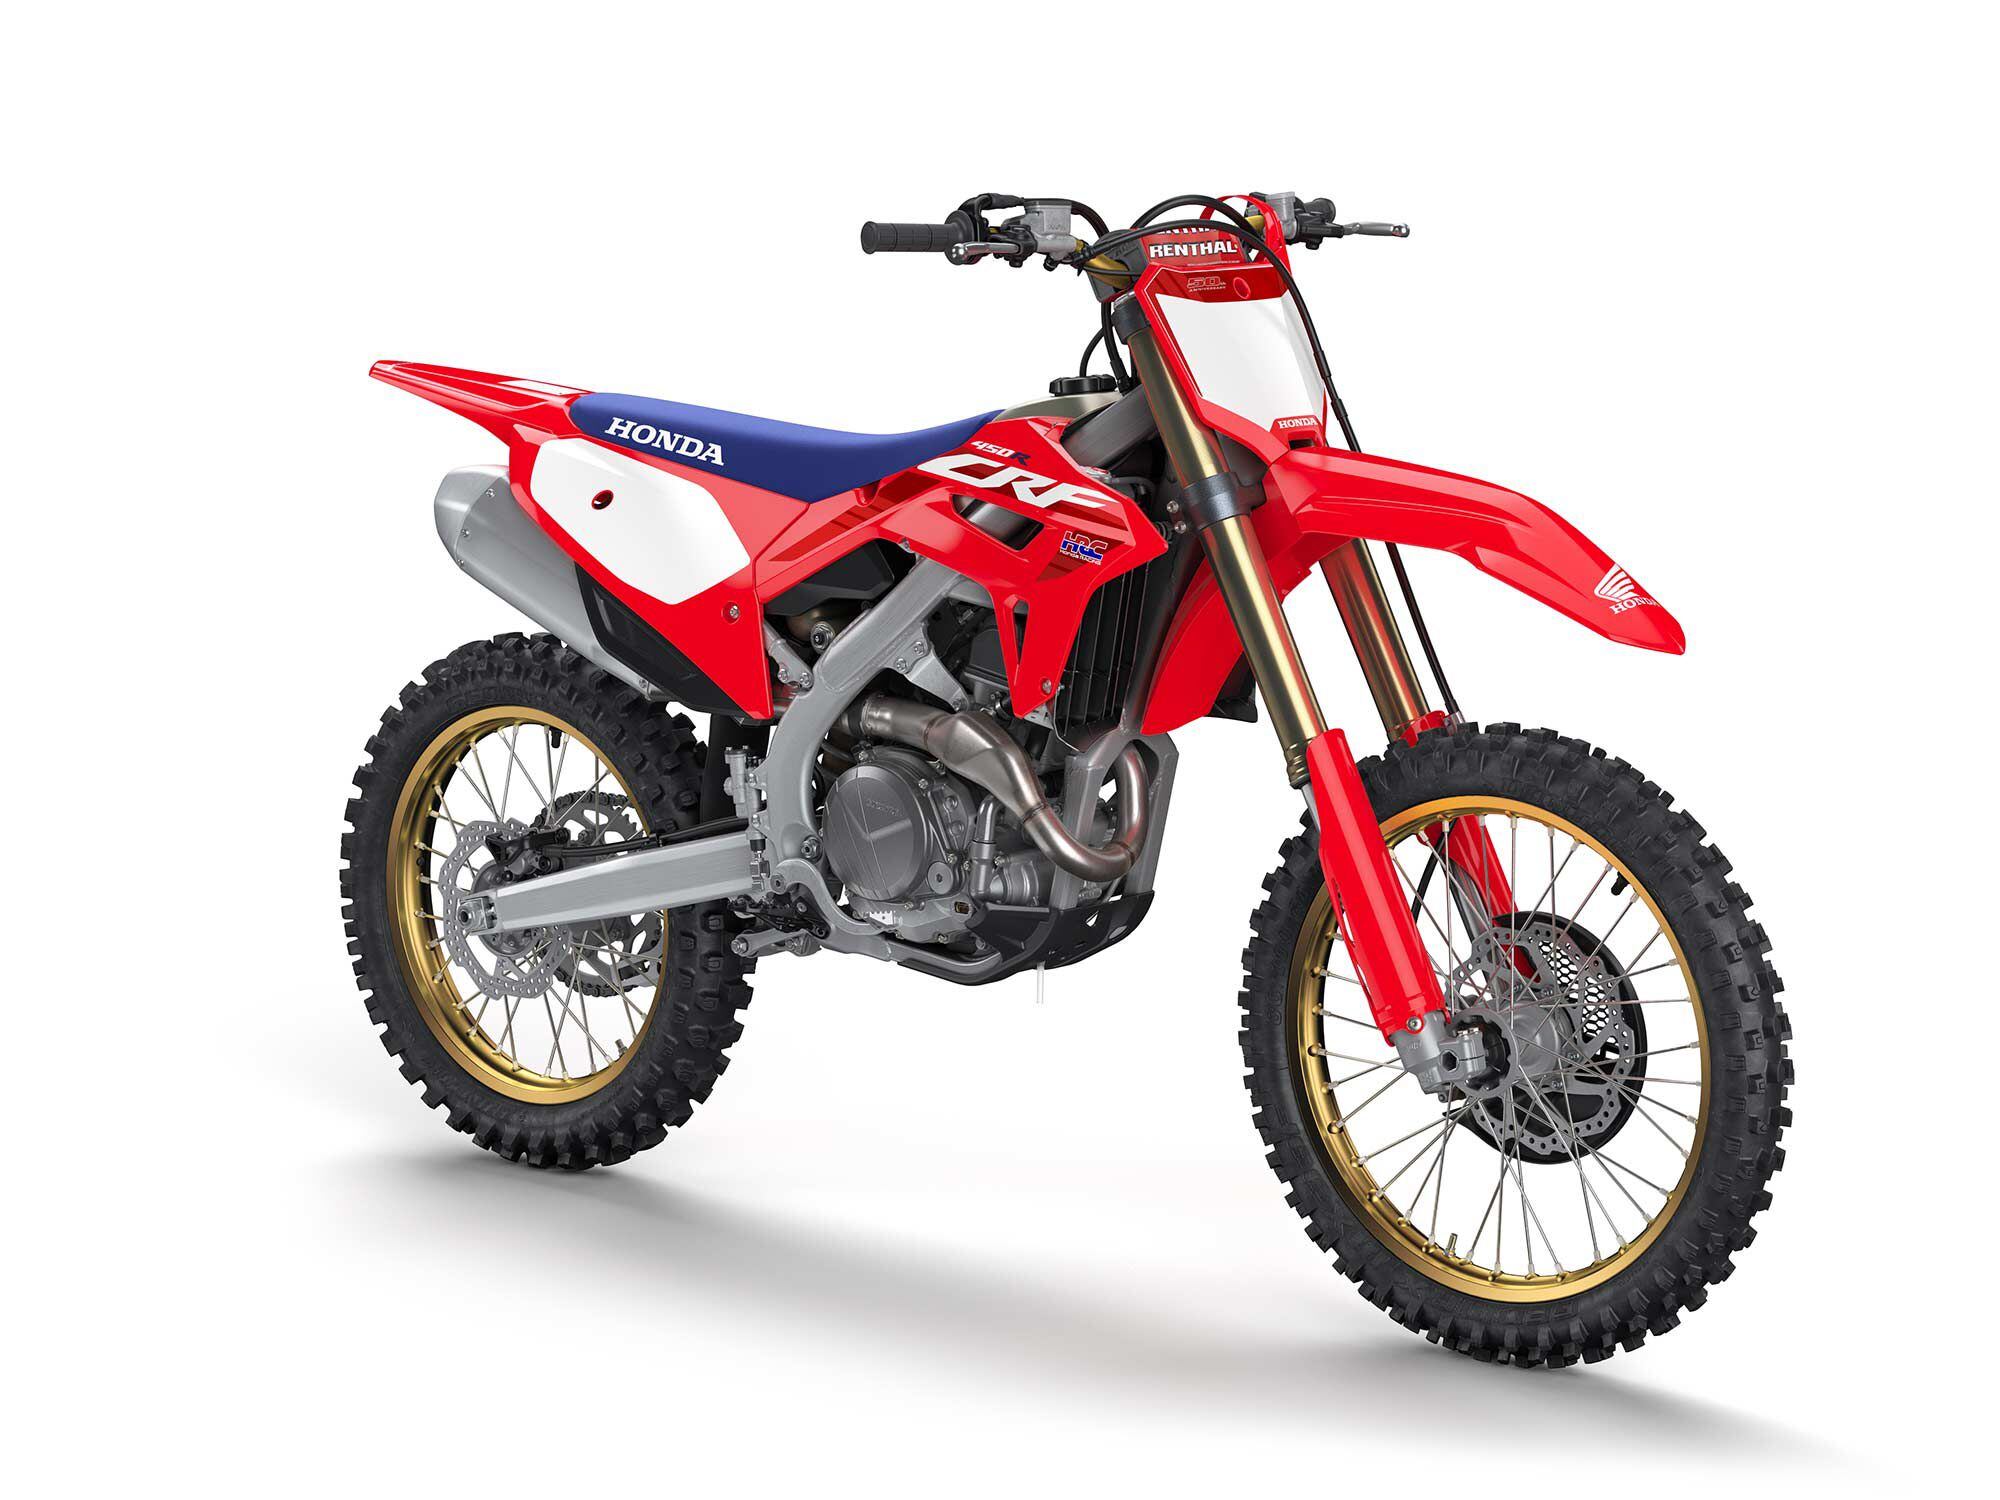 The 2023CRF450R 50th Anniversary Edition will be priced at $ 9,899.